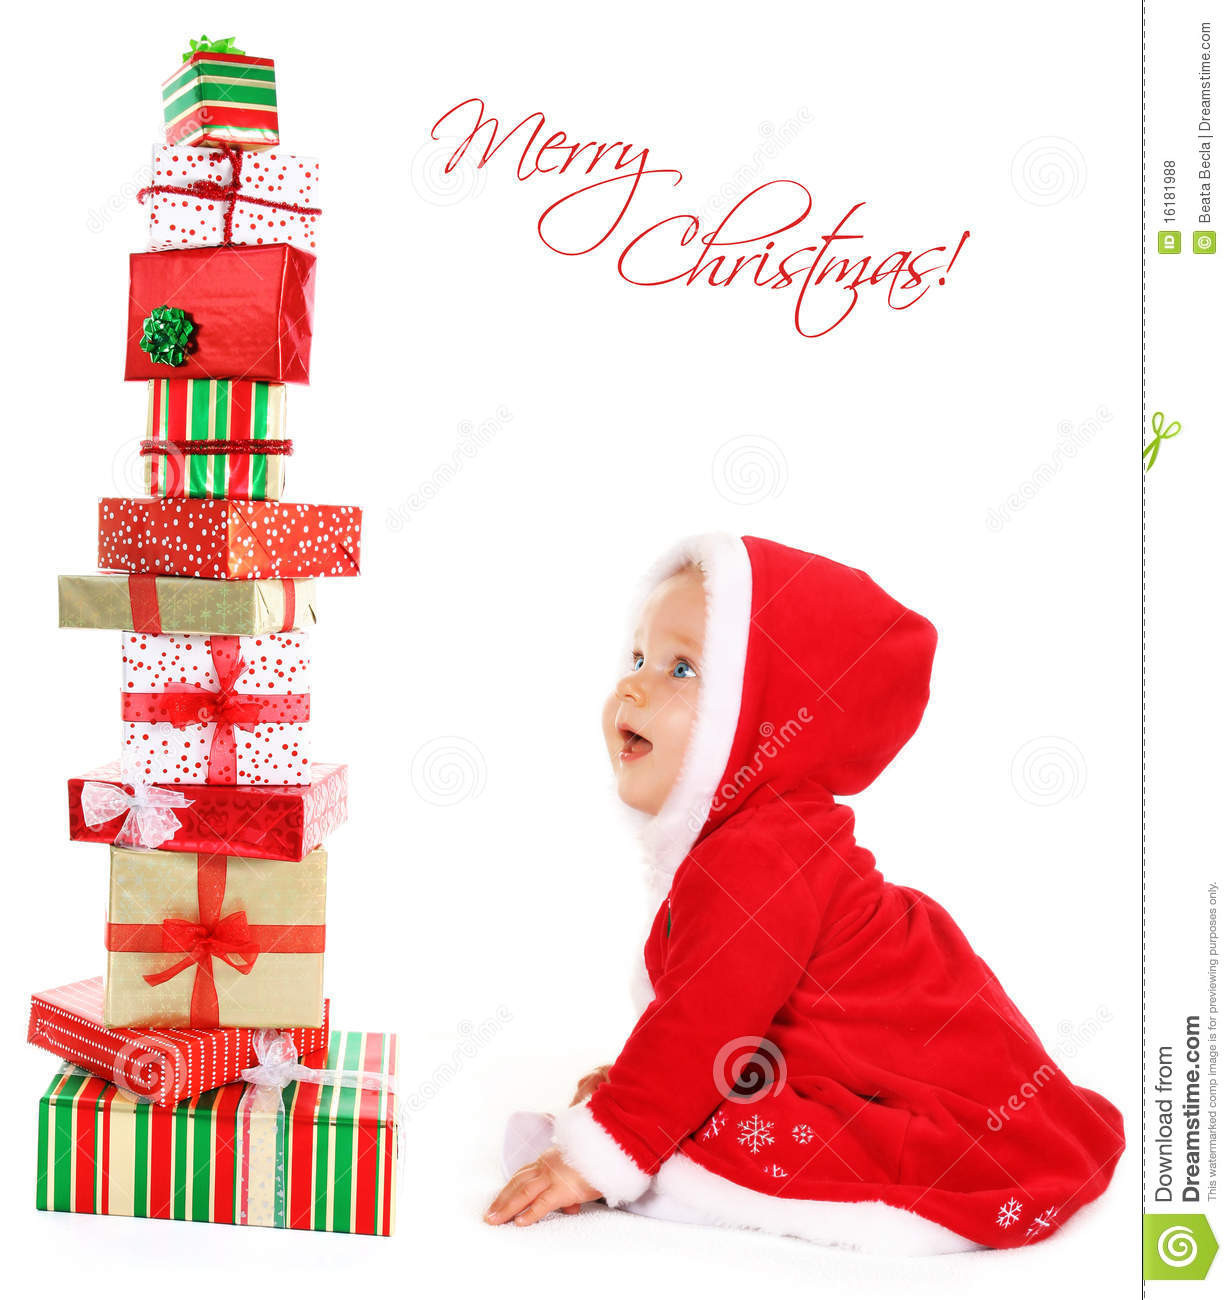 Christmas Gift Ideas From Baby
 Christmas Baby With Gifts Royalty Free Stock s